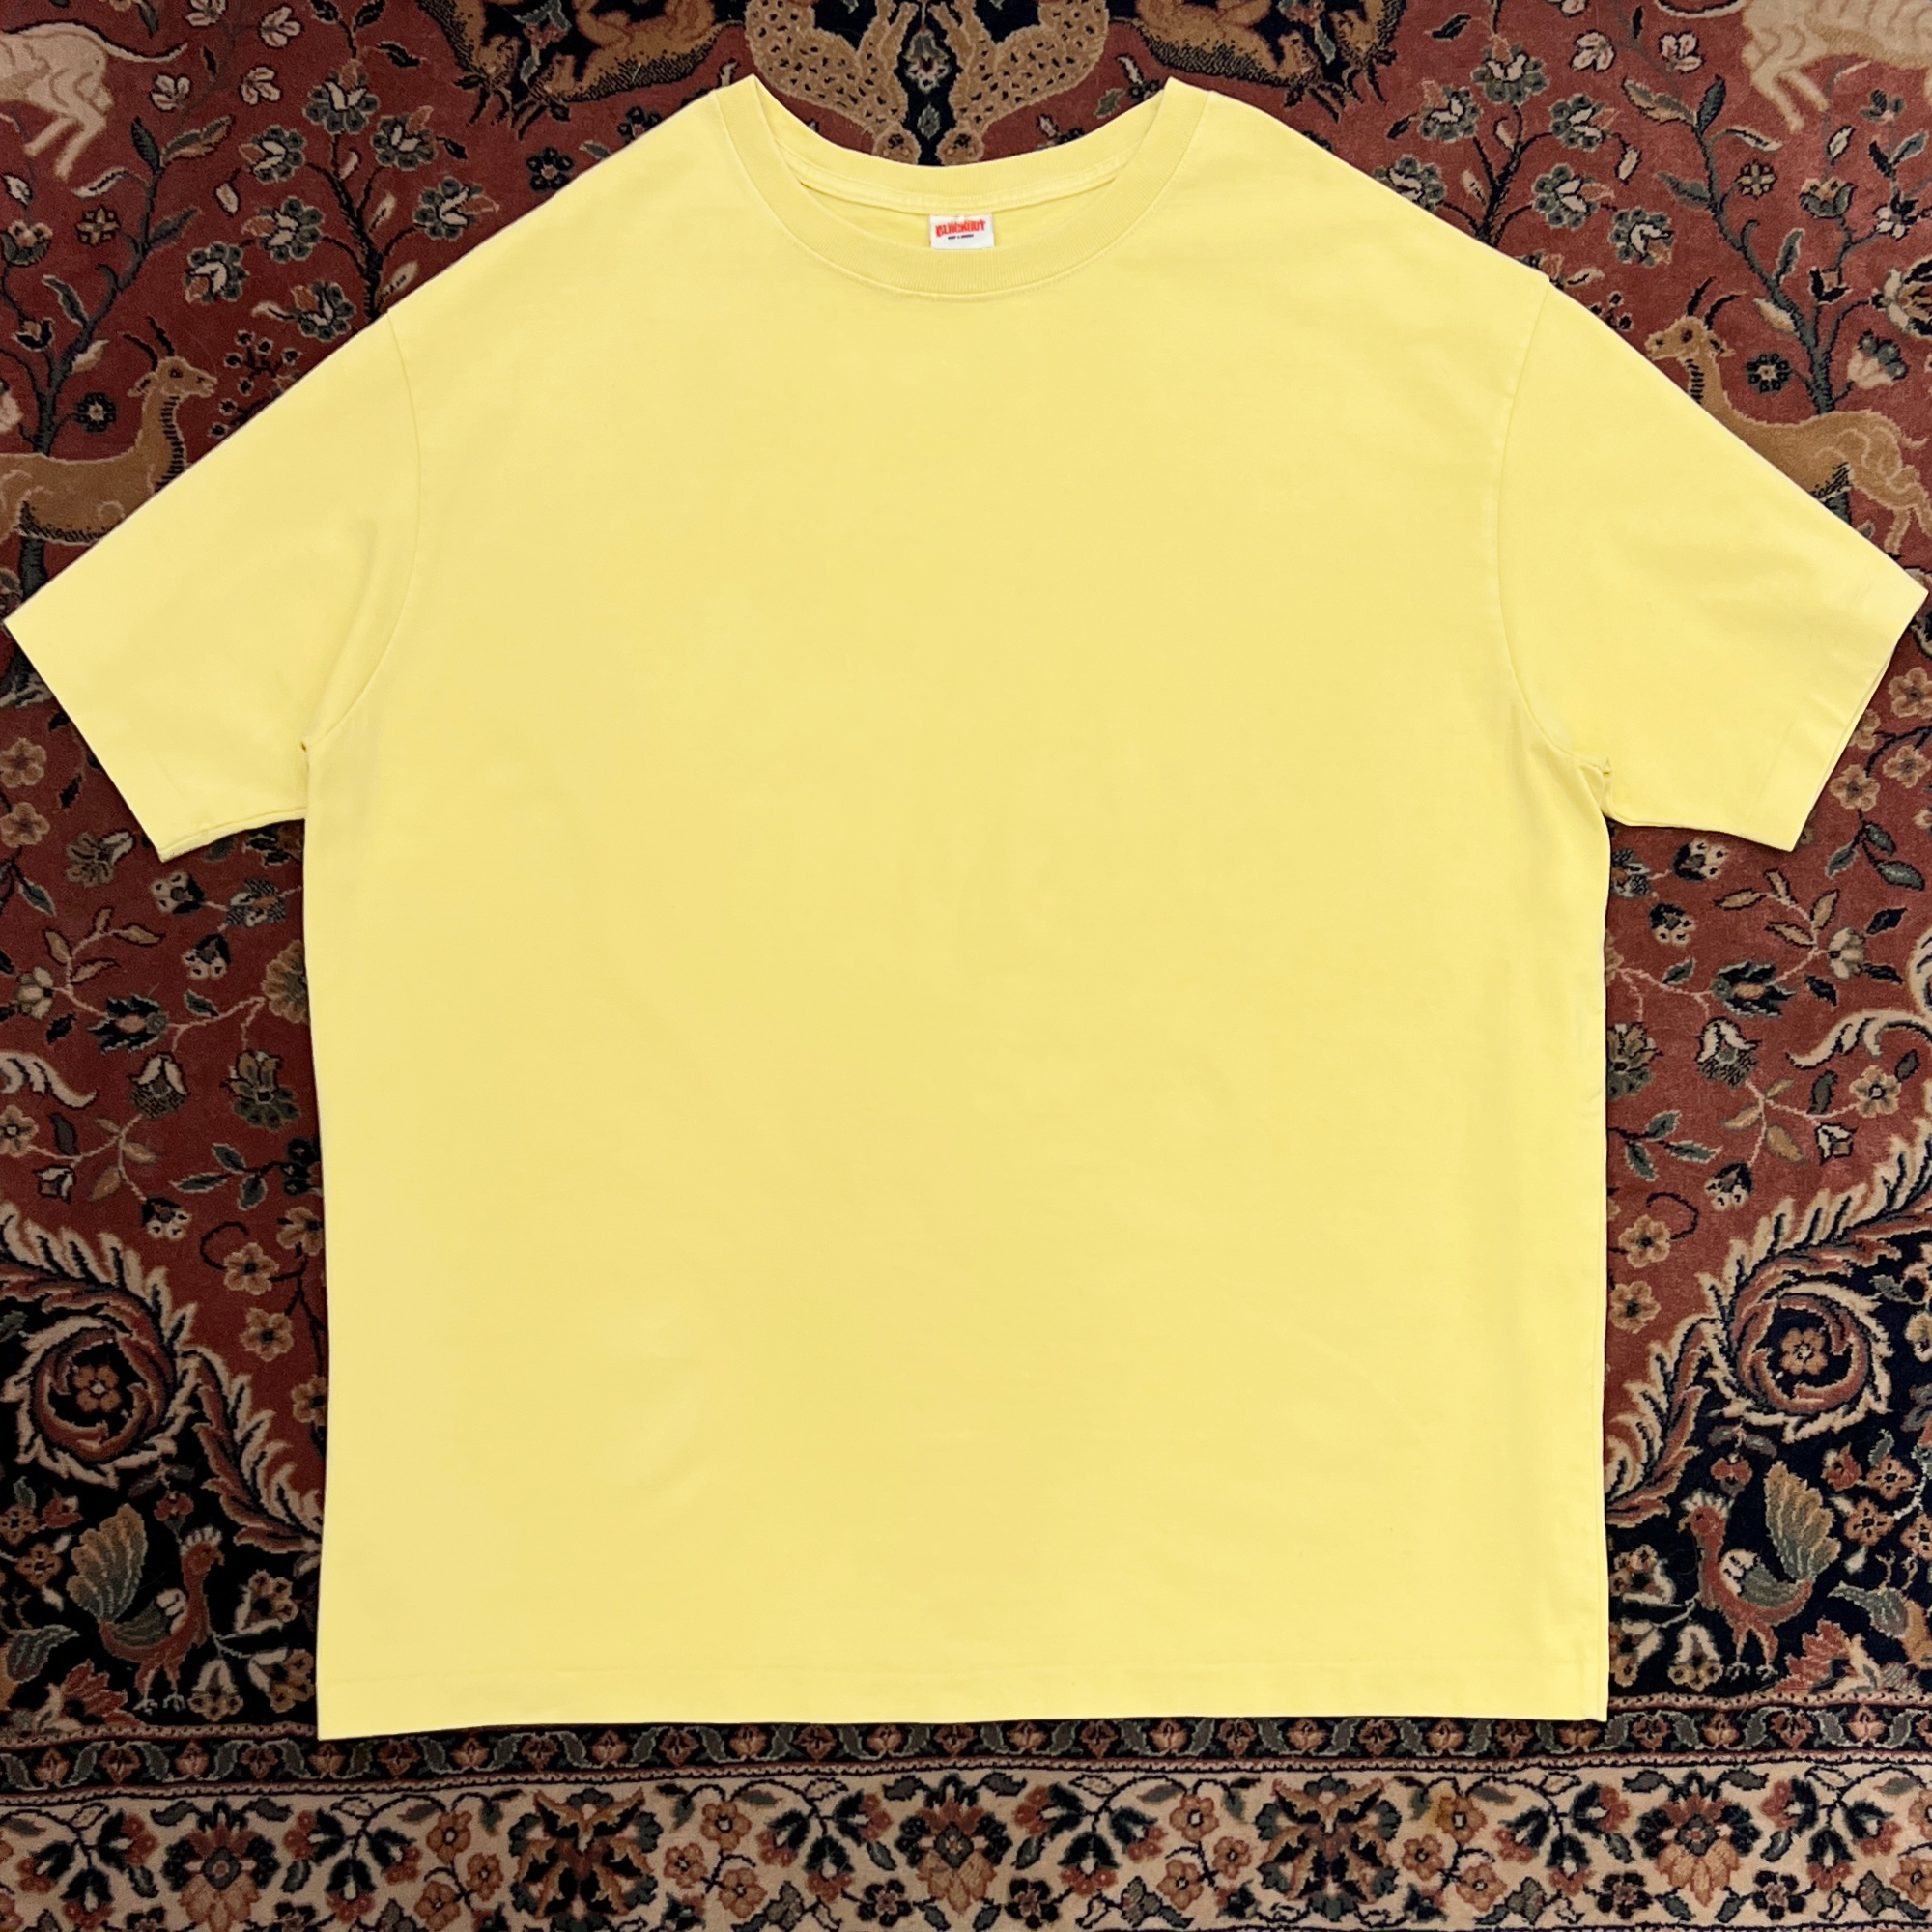 Dyed t shirt